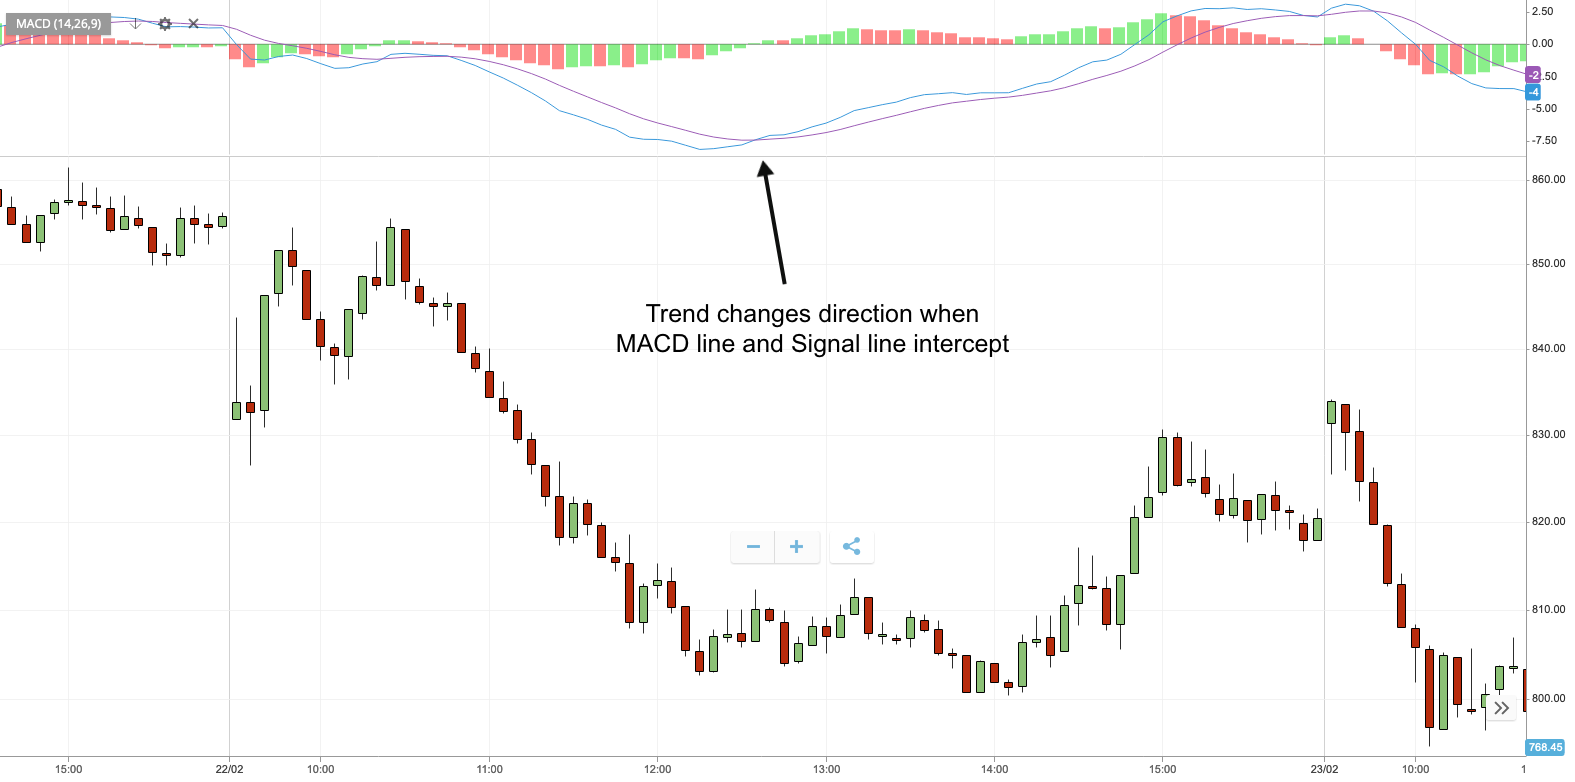 Analyzing the binary options chart forex options forecasts